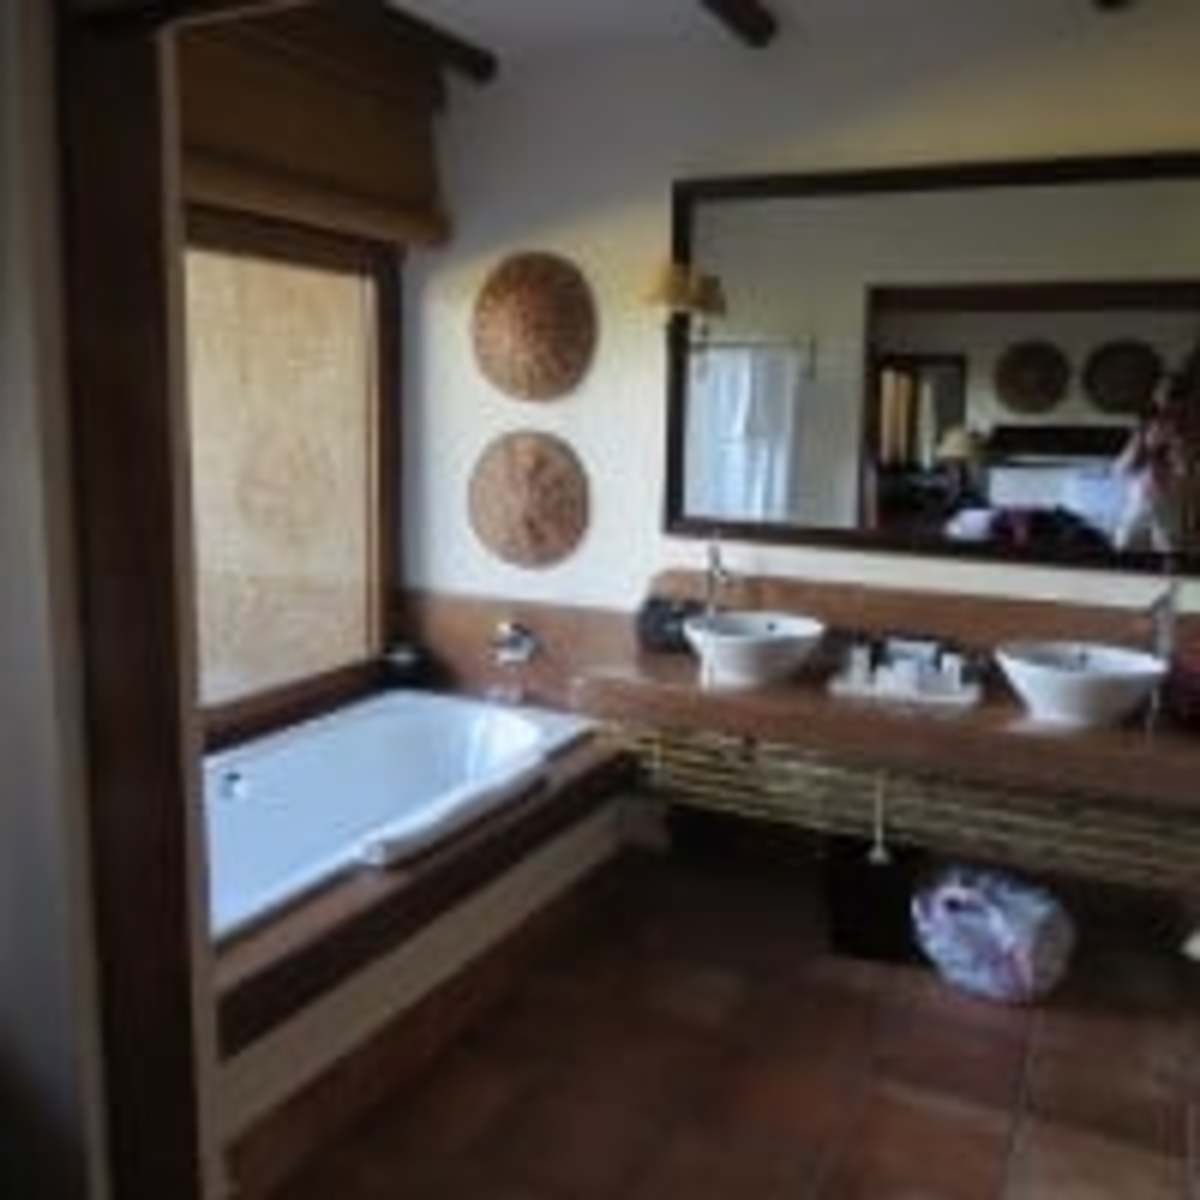 The Bathroom Which Overlooks "The Bush"